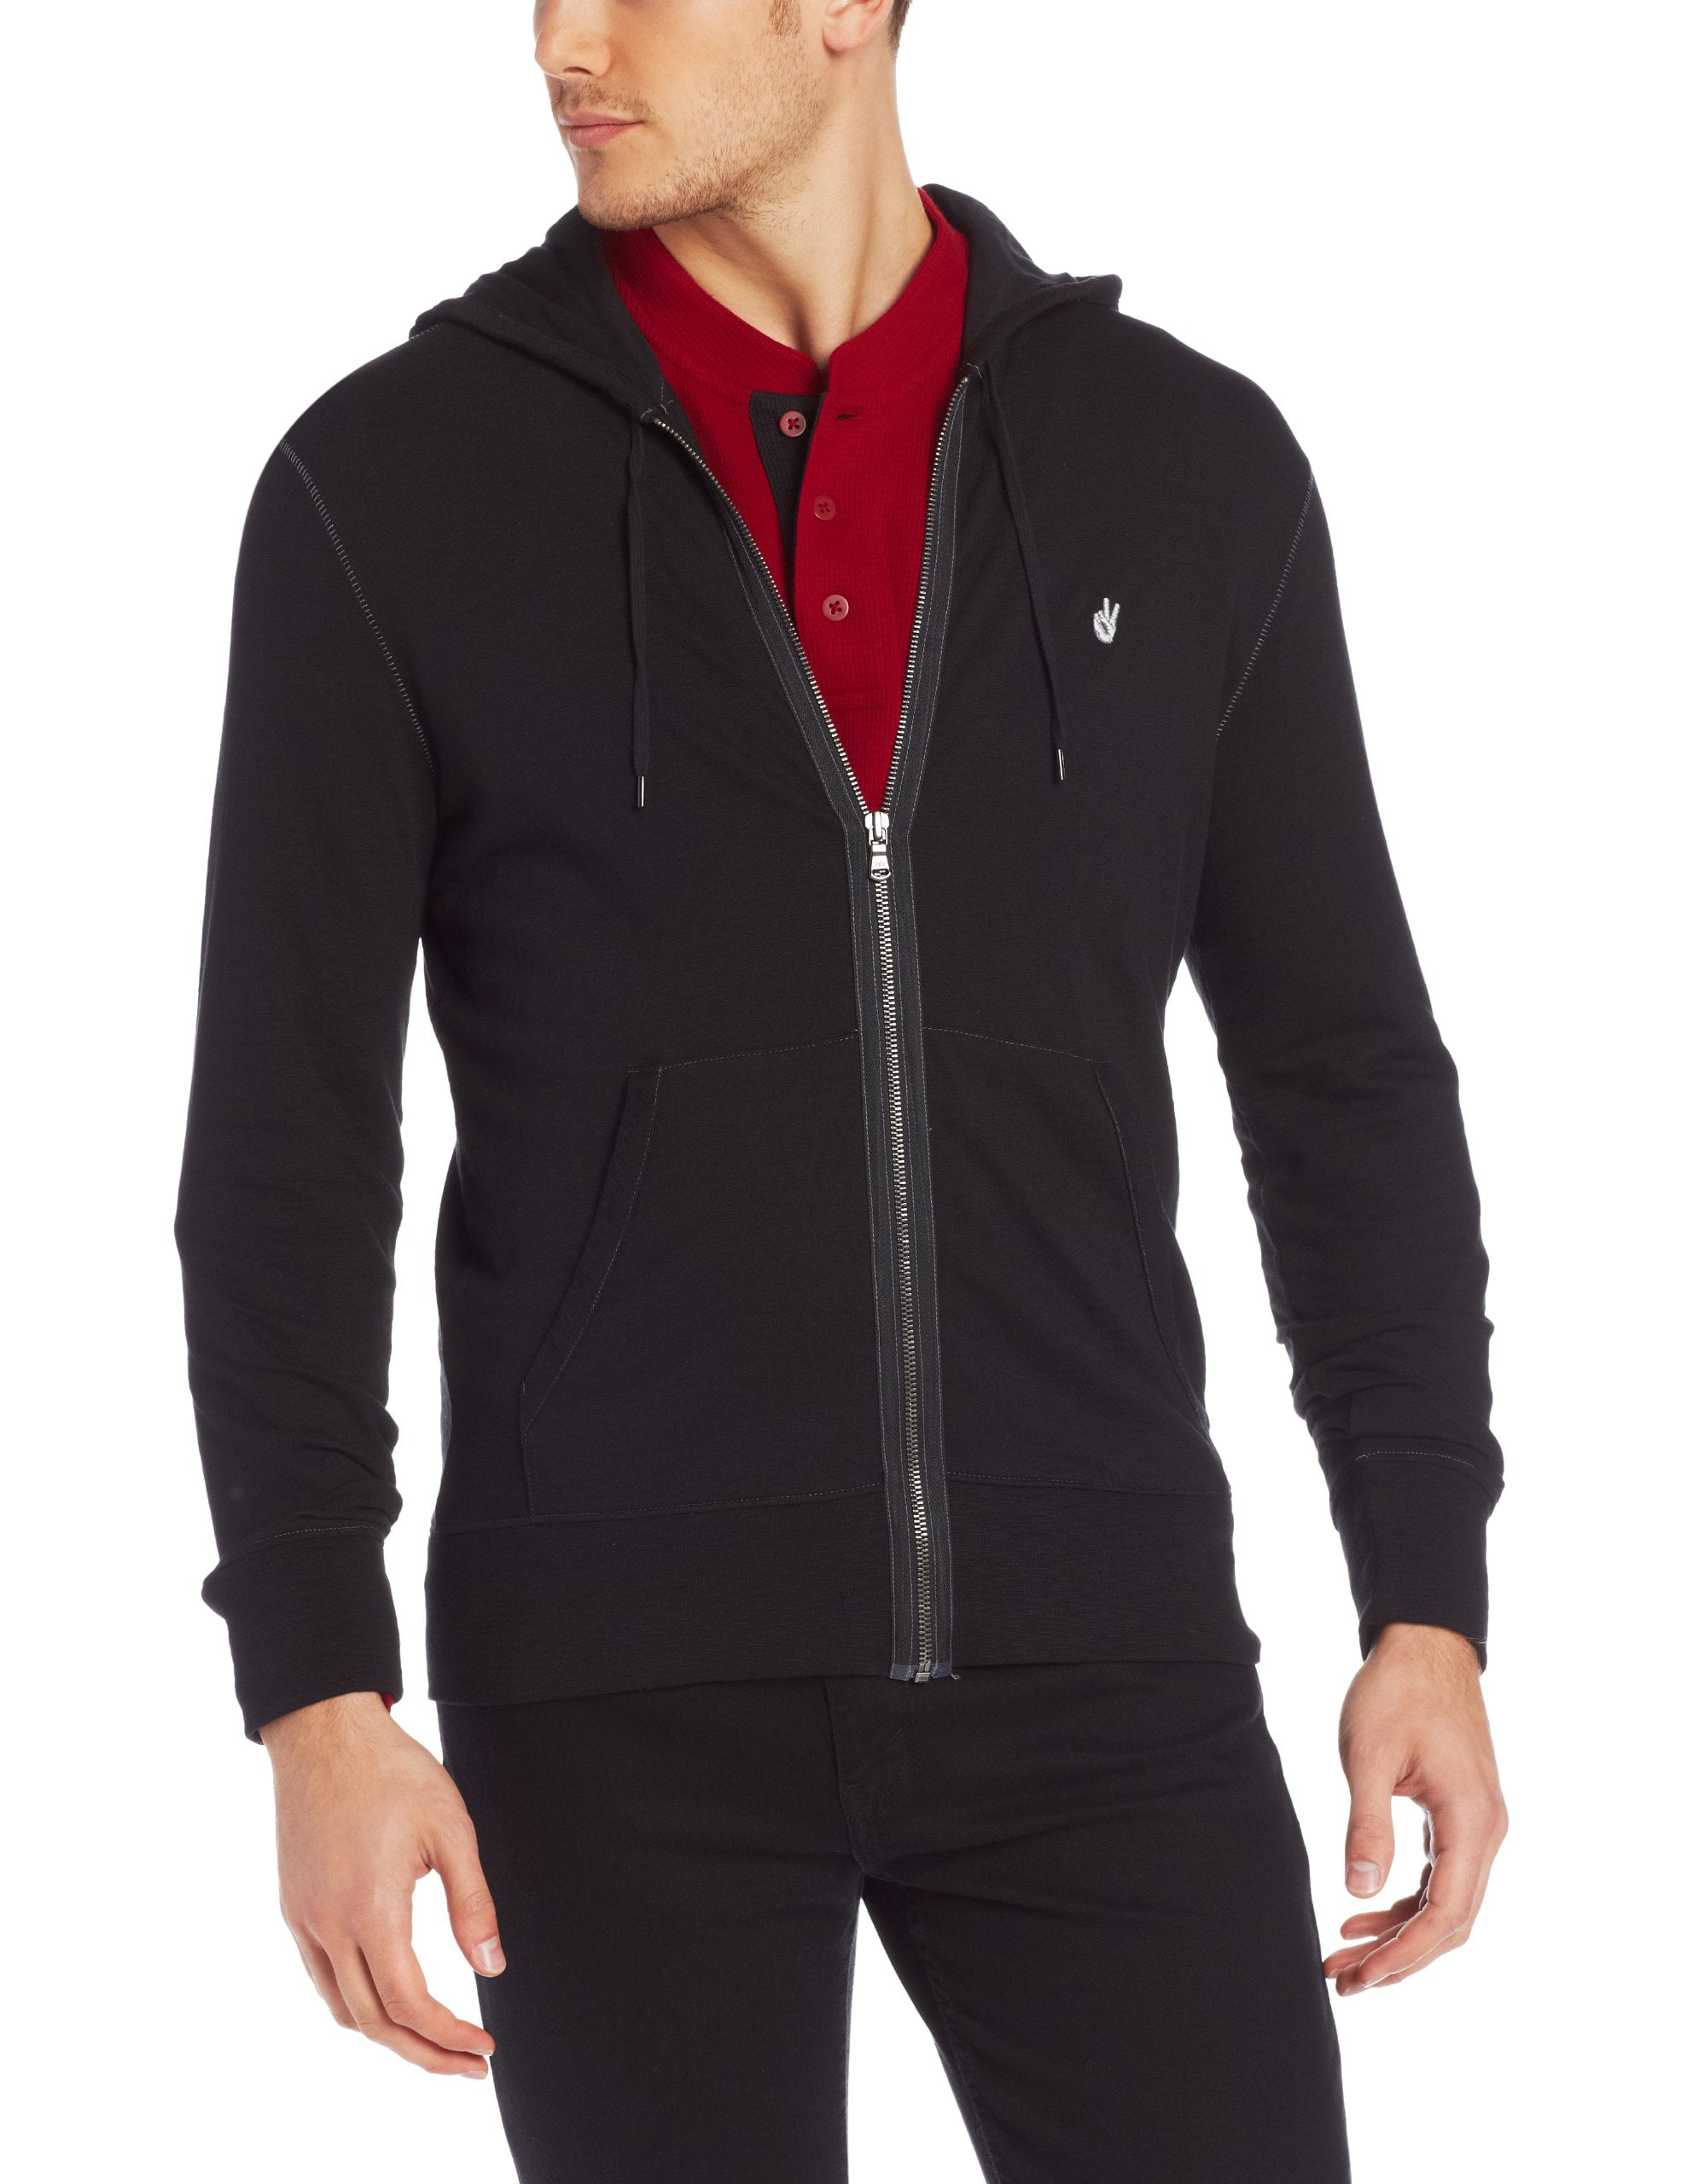 John Varvatos Mens Long Sleeve Classic Zip Front Hoodie 3 Star Embroidered